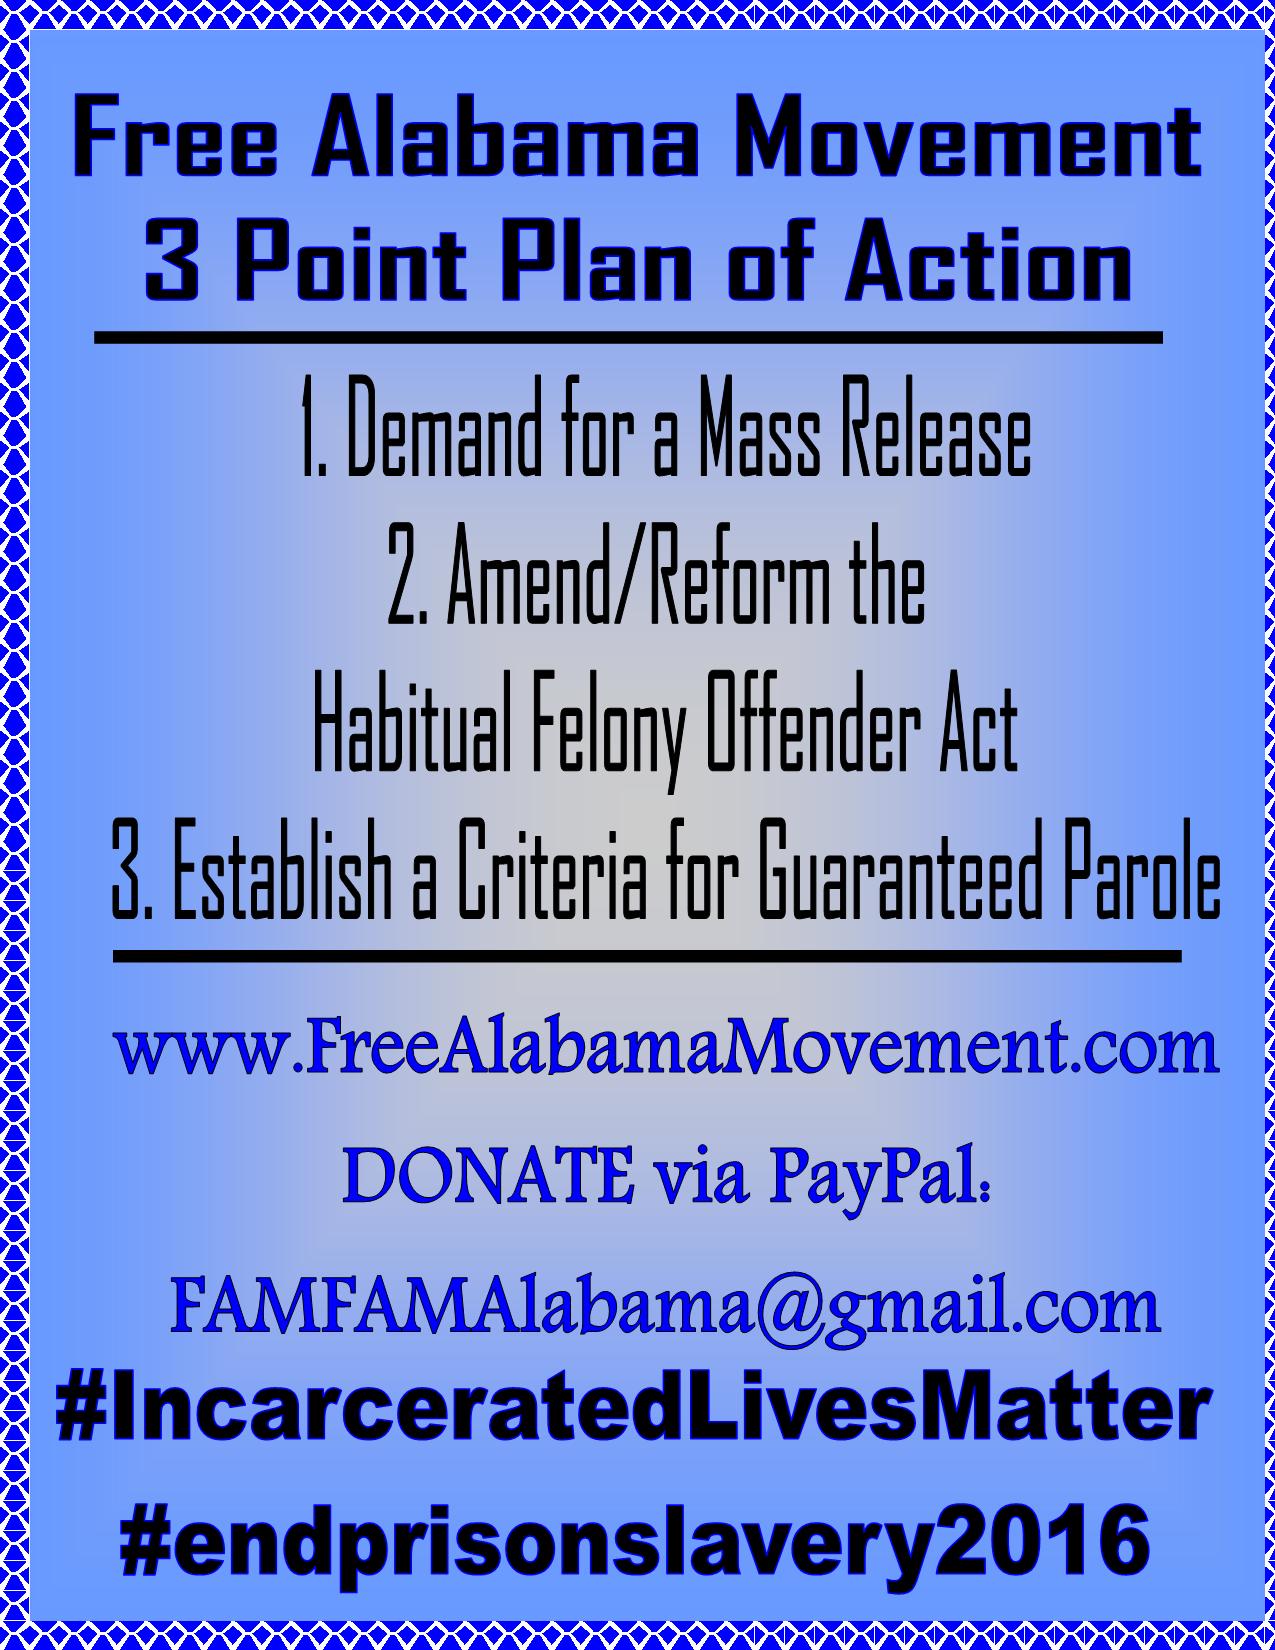 Announcement sign for Free Alabama Movement 3 point plan of action